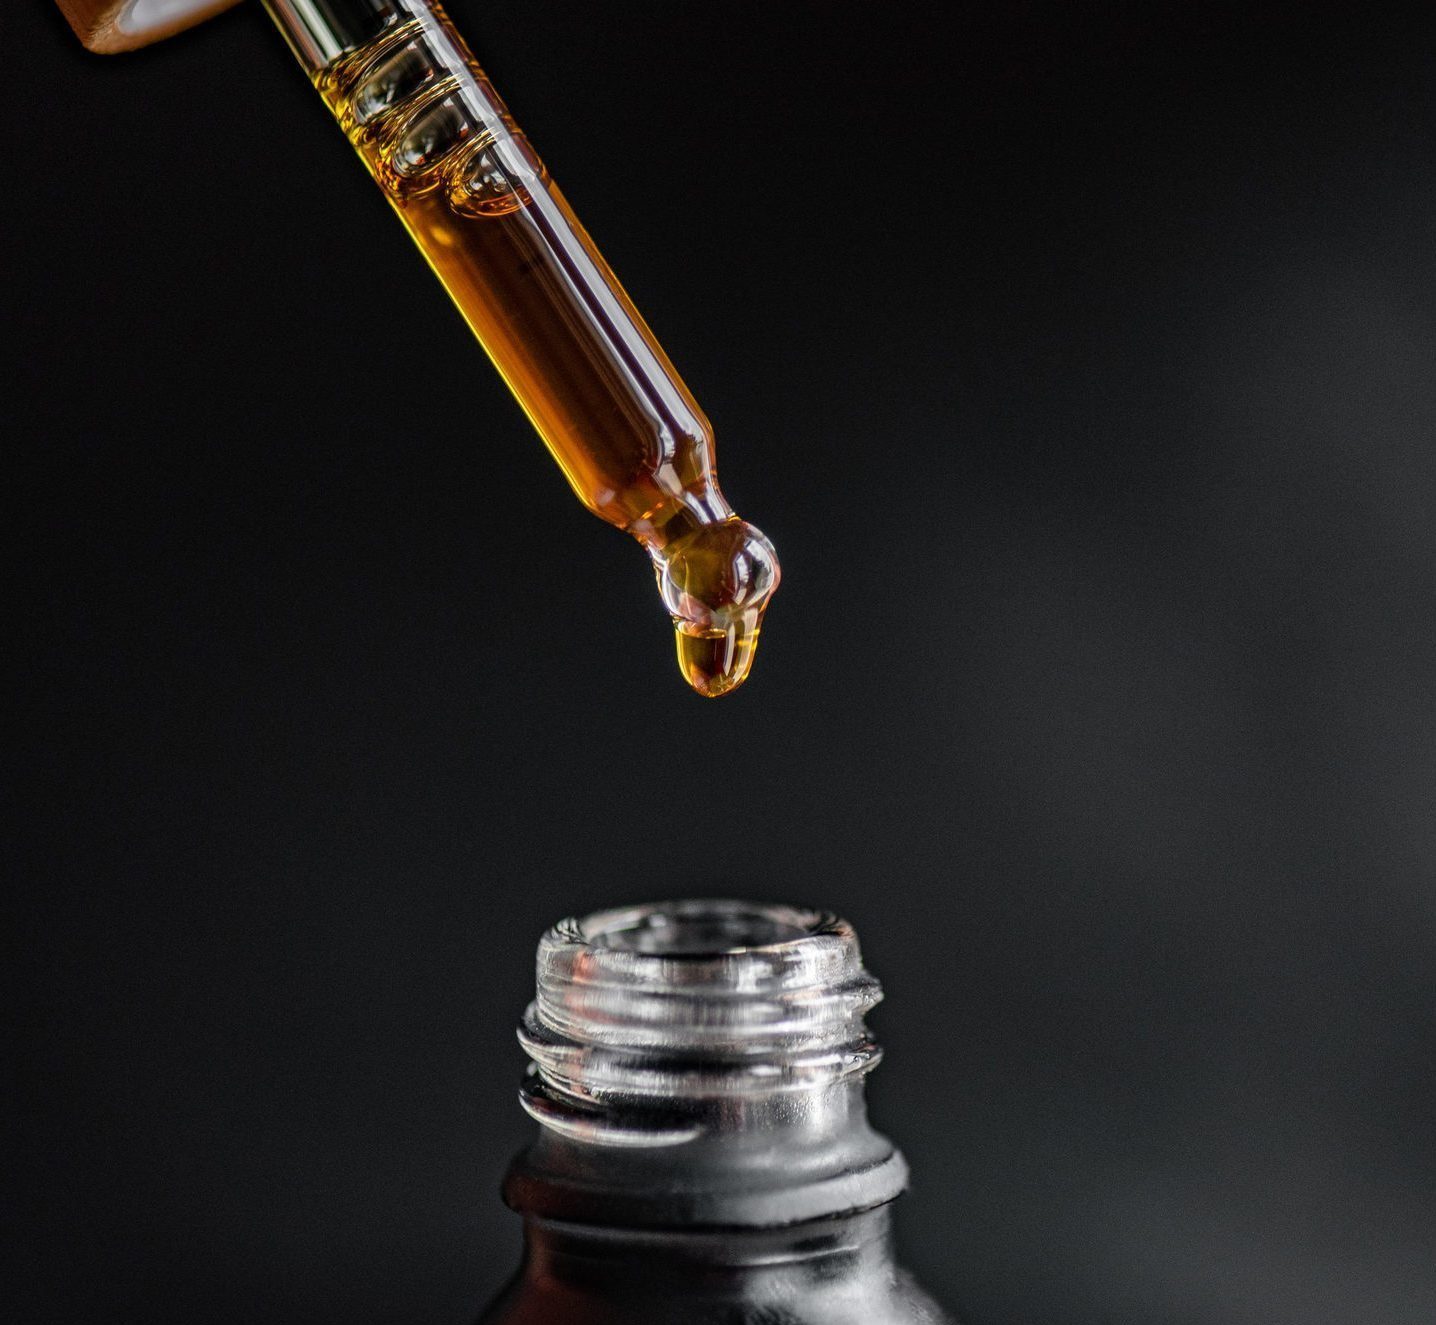 Here's What You Should Know About CBD Tinctures